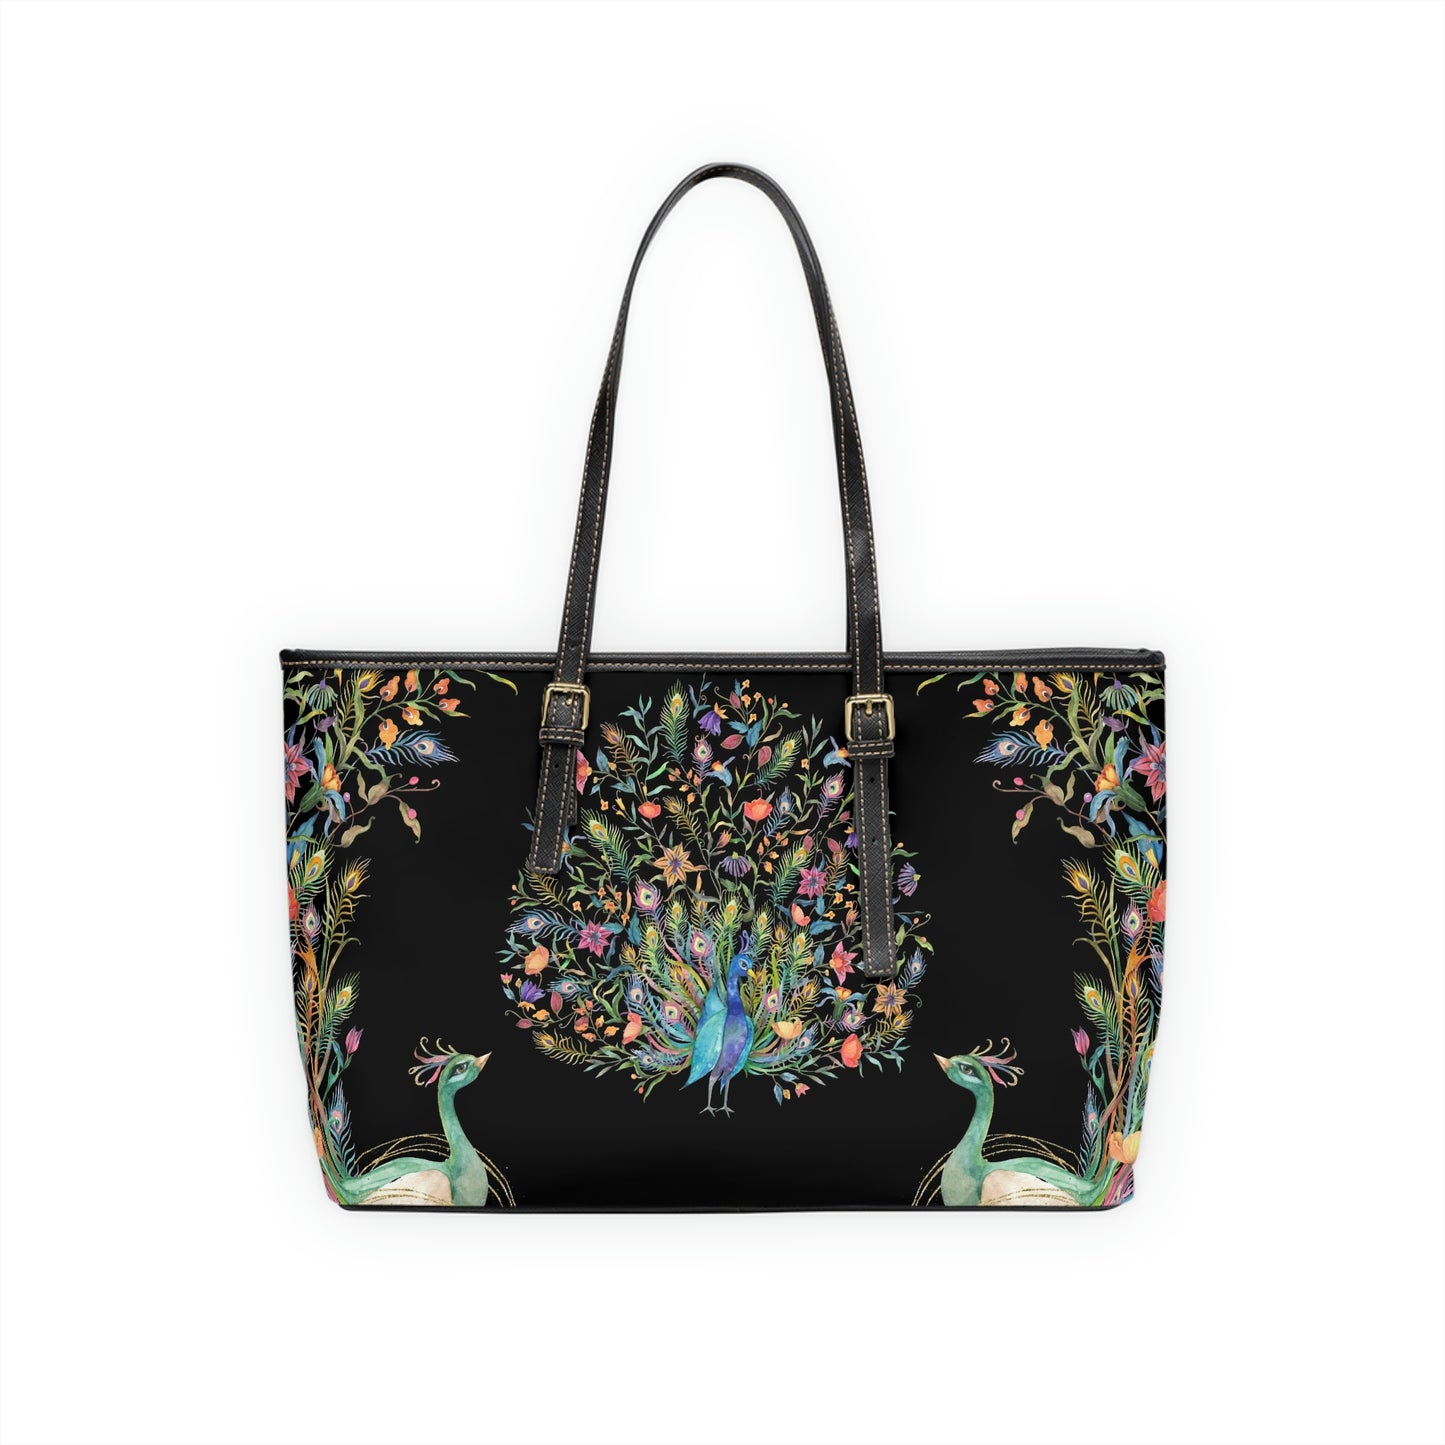 Peacock Leather Shoulder Bag for her. Floral purse. Mothers days gift ideas